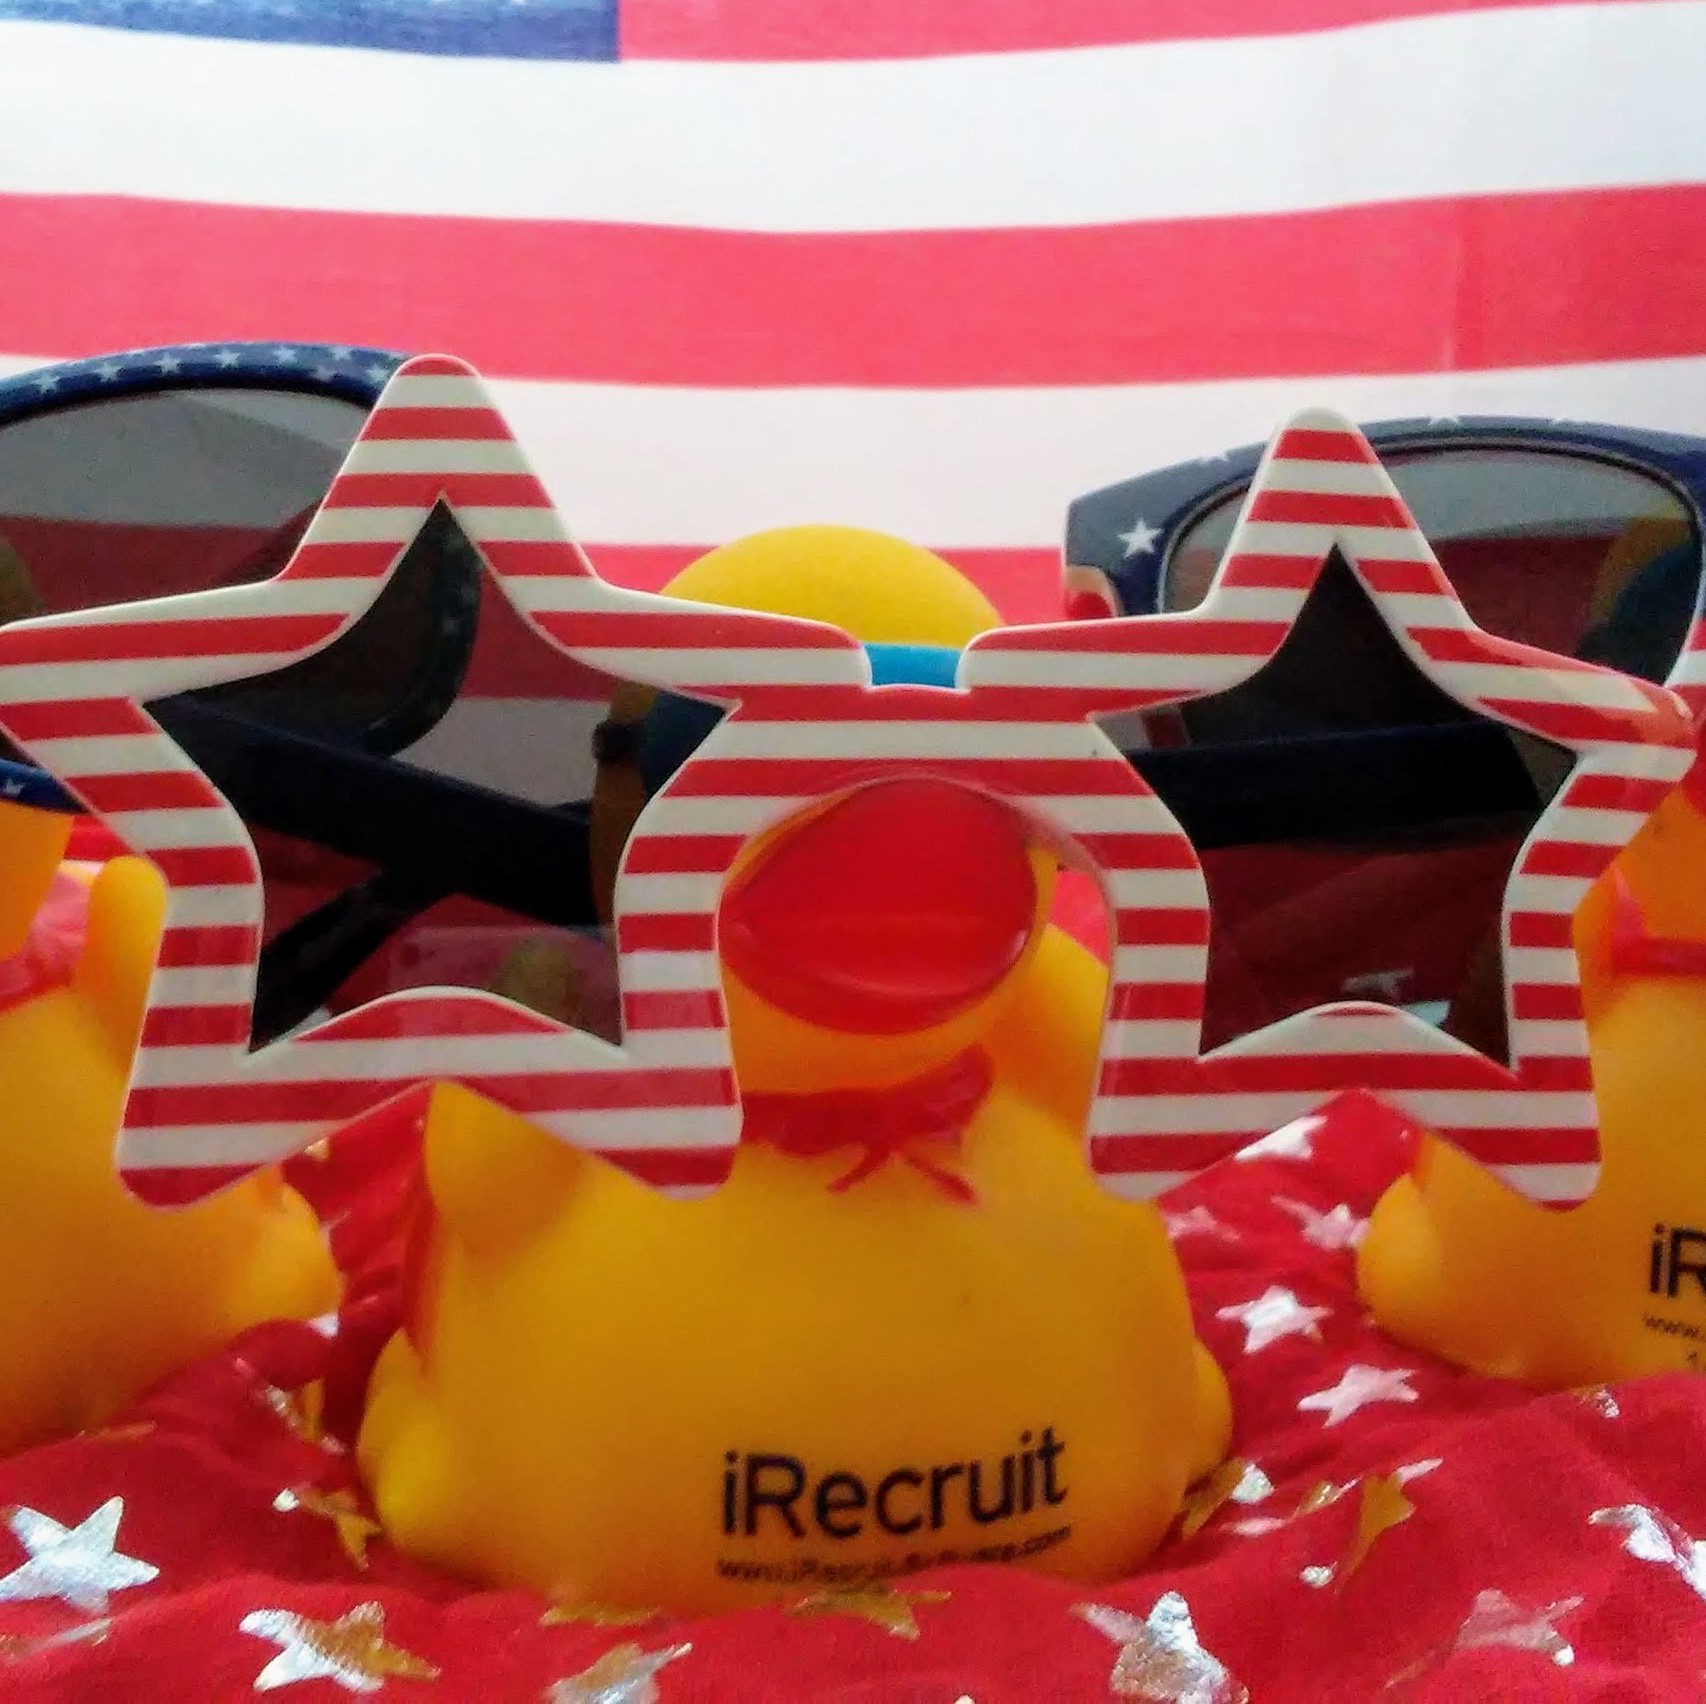 irecruit-duck-independence-day-square